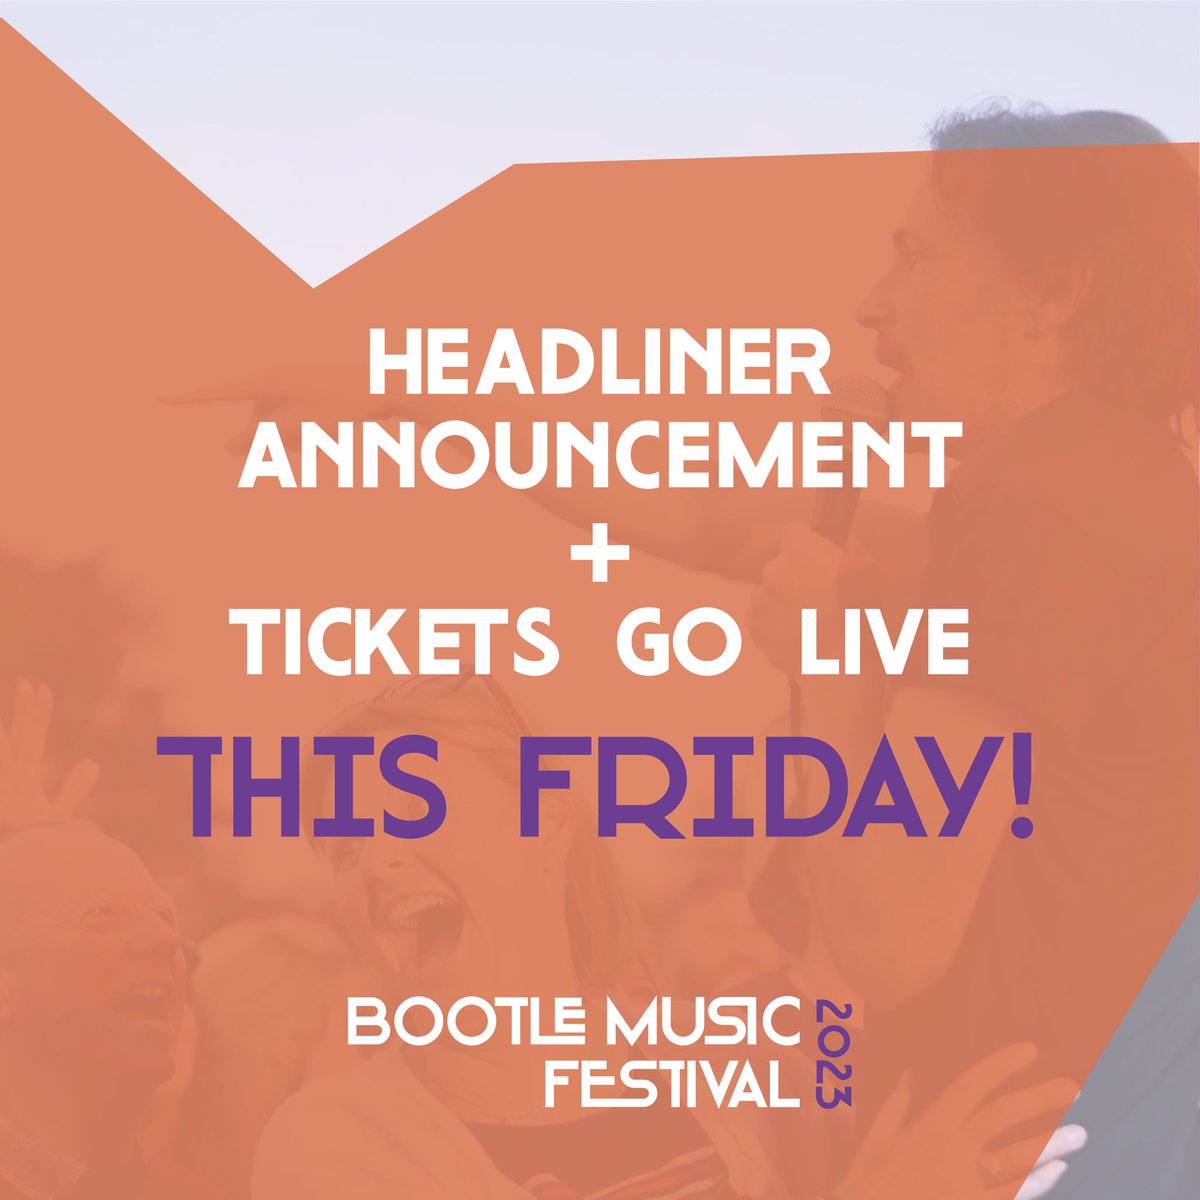 This Friday…… You DON’T want to miss our Earlybird offers🥳

#bootlemusicfestival #bmf #lockandquaybootle #destinationbootle 
@janeatsaferegen @SafeBrian @BootleMusic